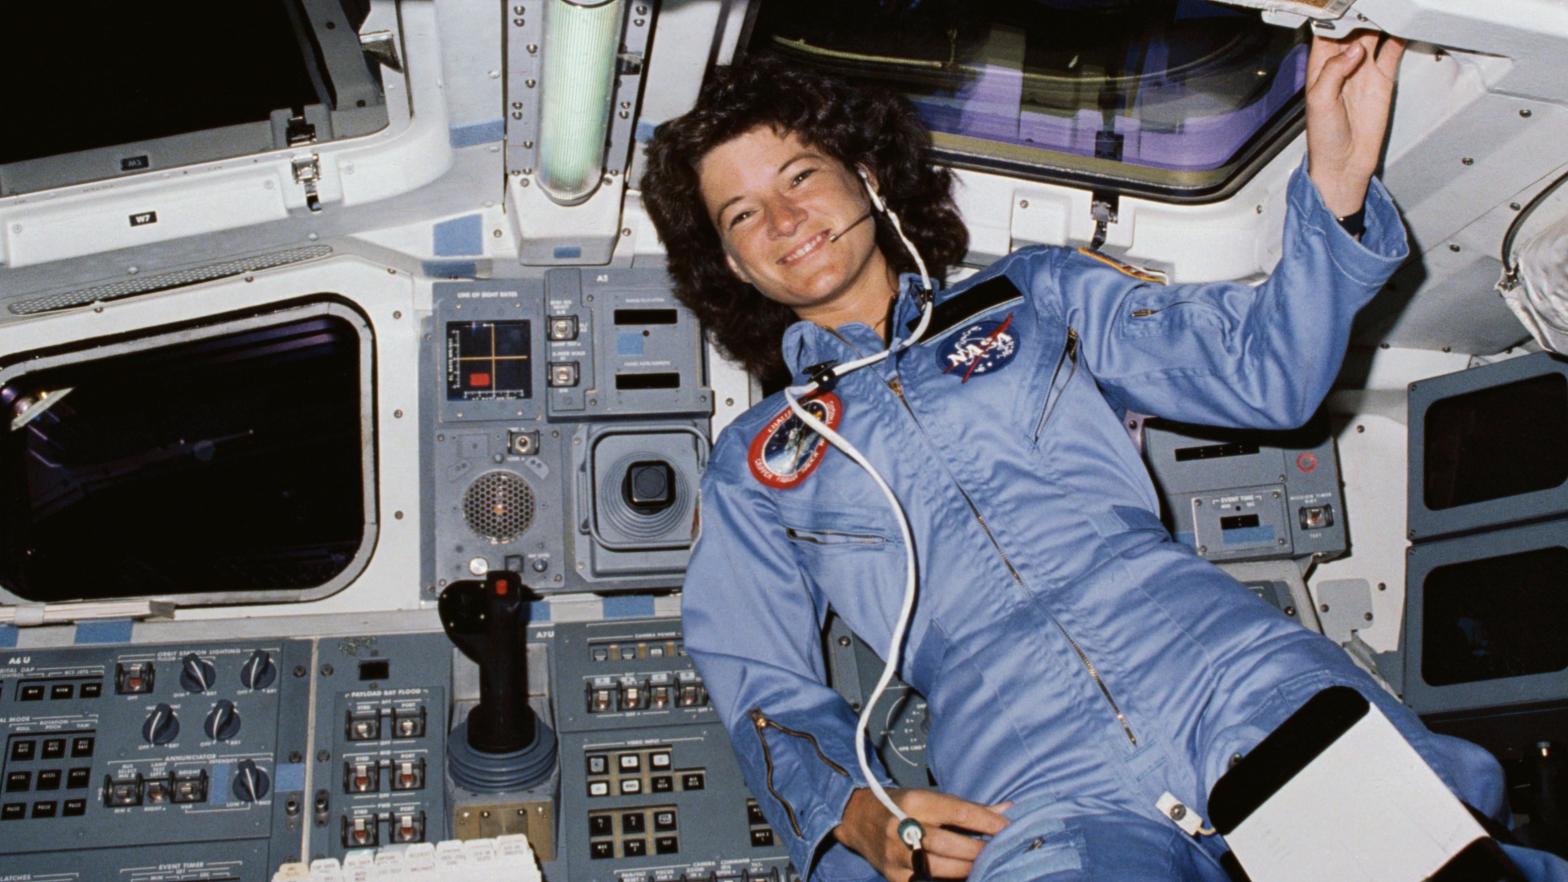 Ride became the first American woman in space aboard the orbiter Challenger in 1983. (Photo: NASA)